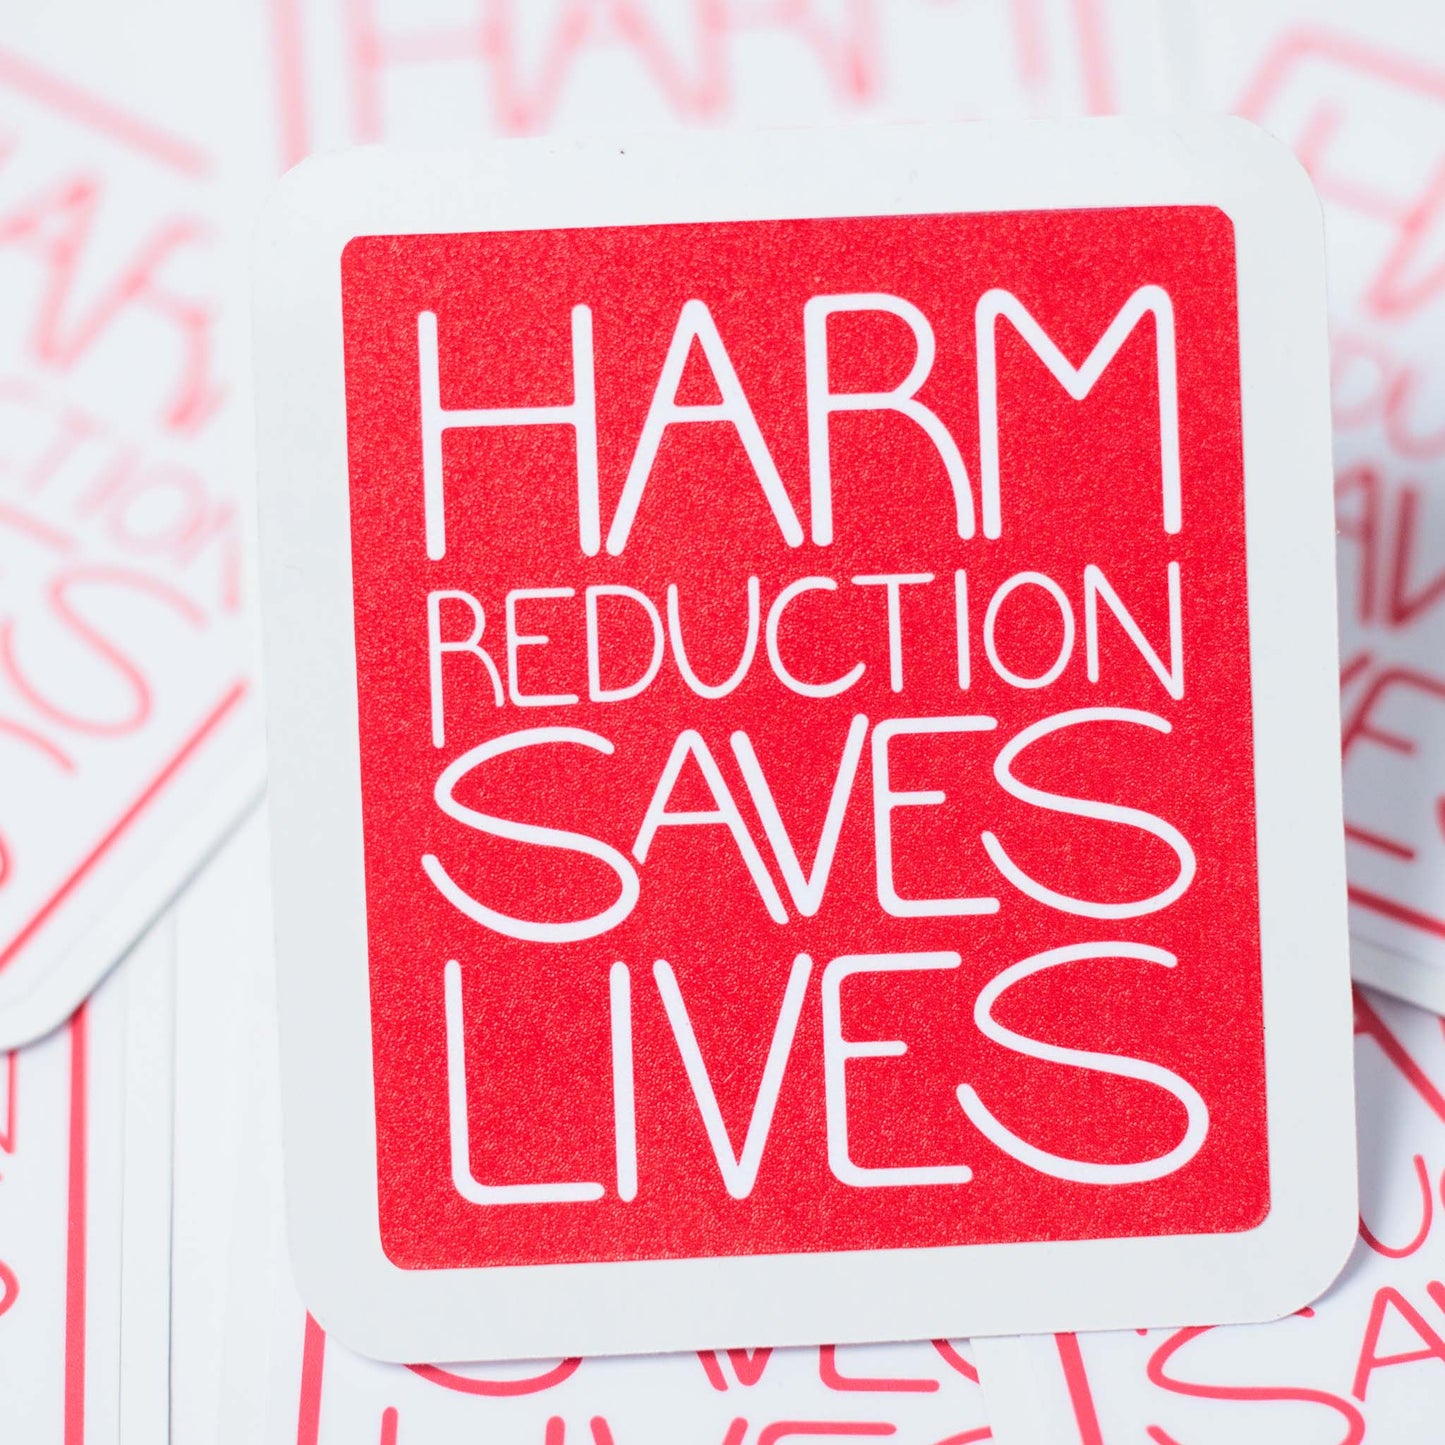 Harm Reduction Saves Lives